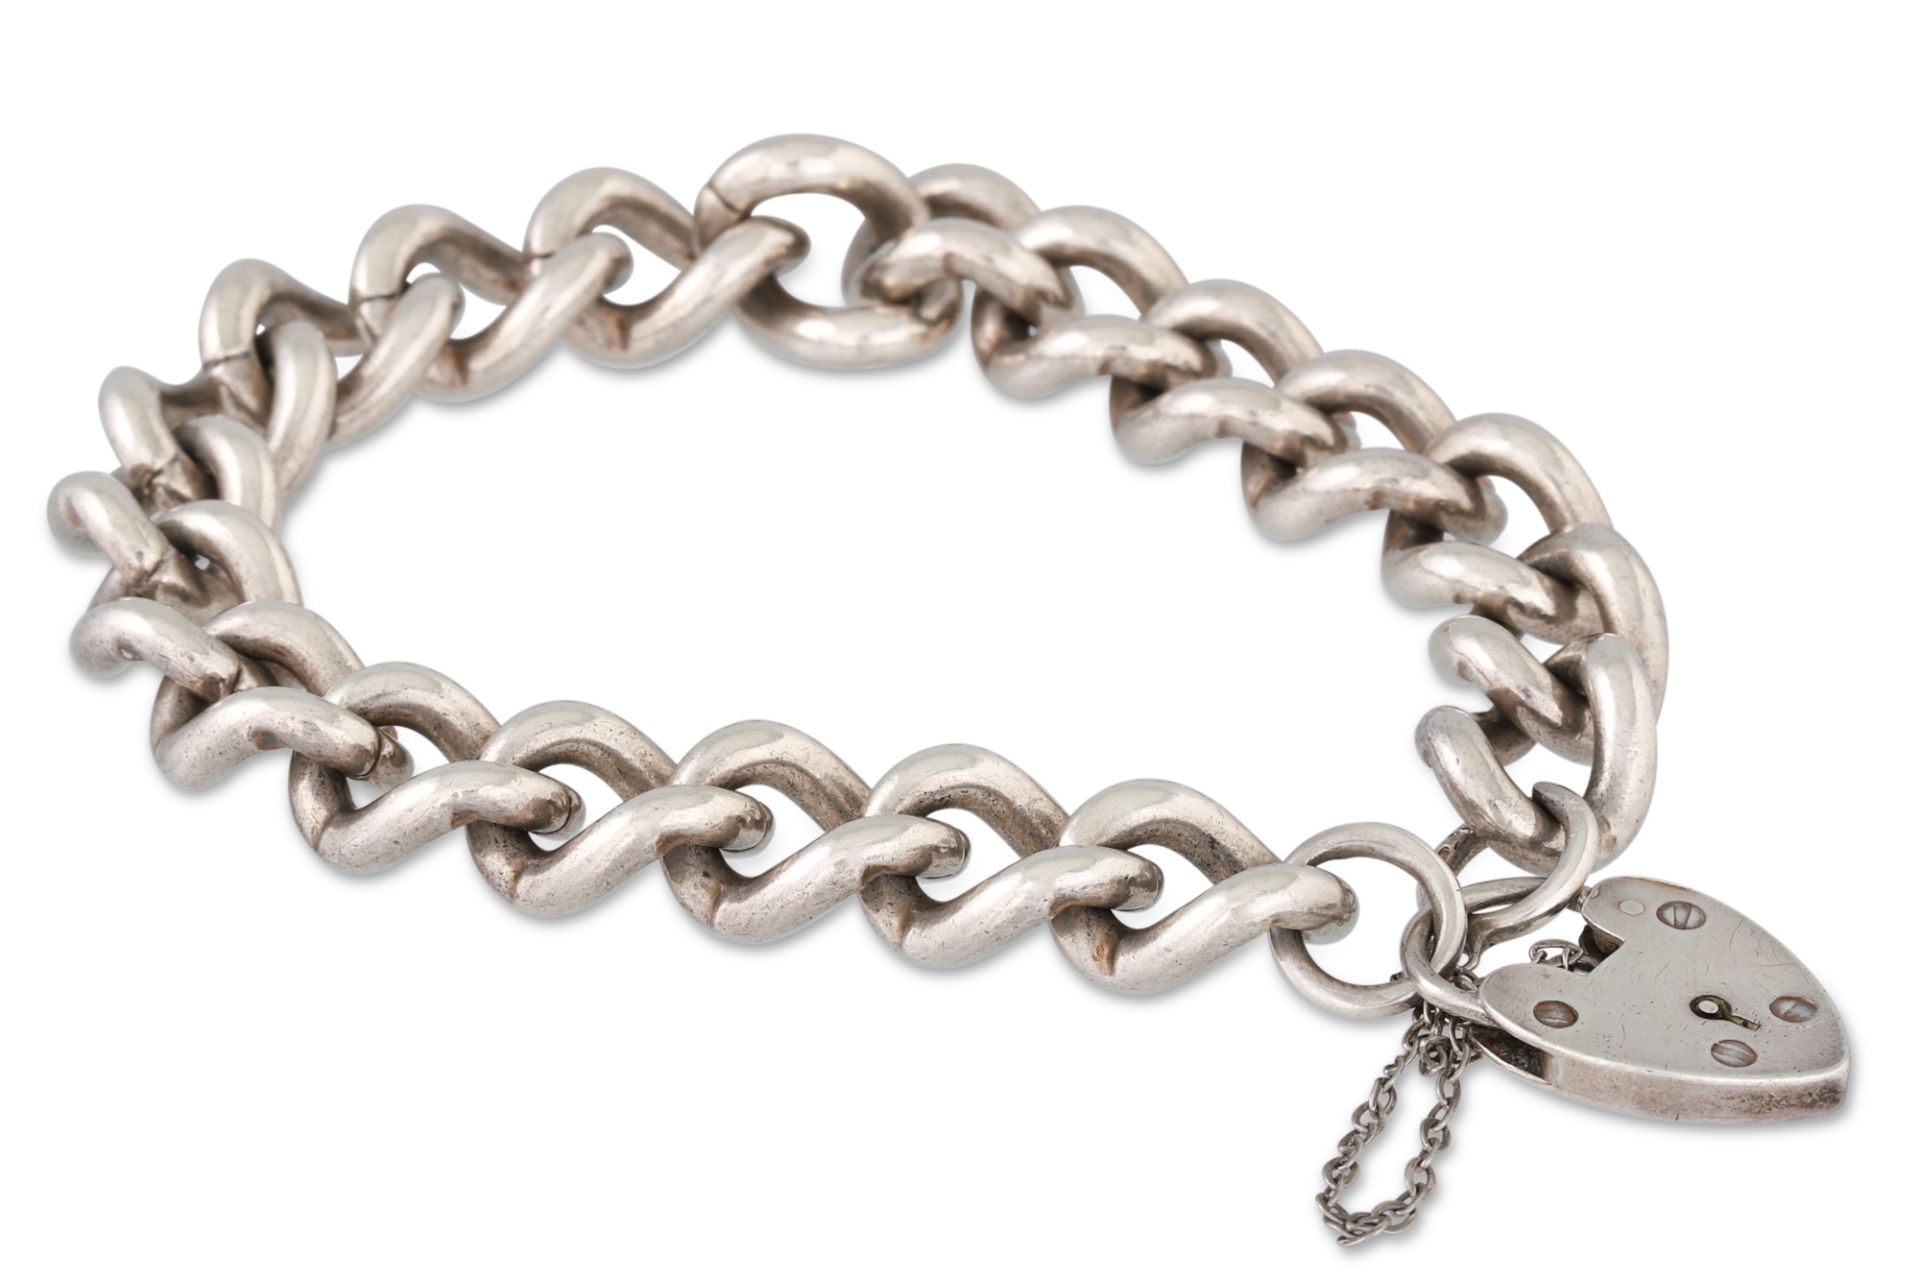 AN ANTIQUE SILVER CURB BRACELET, with padlock